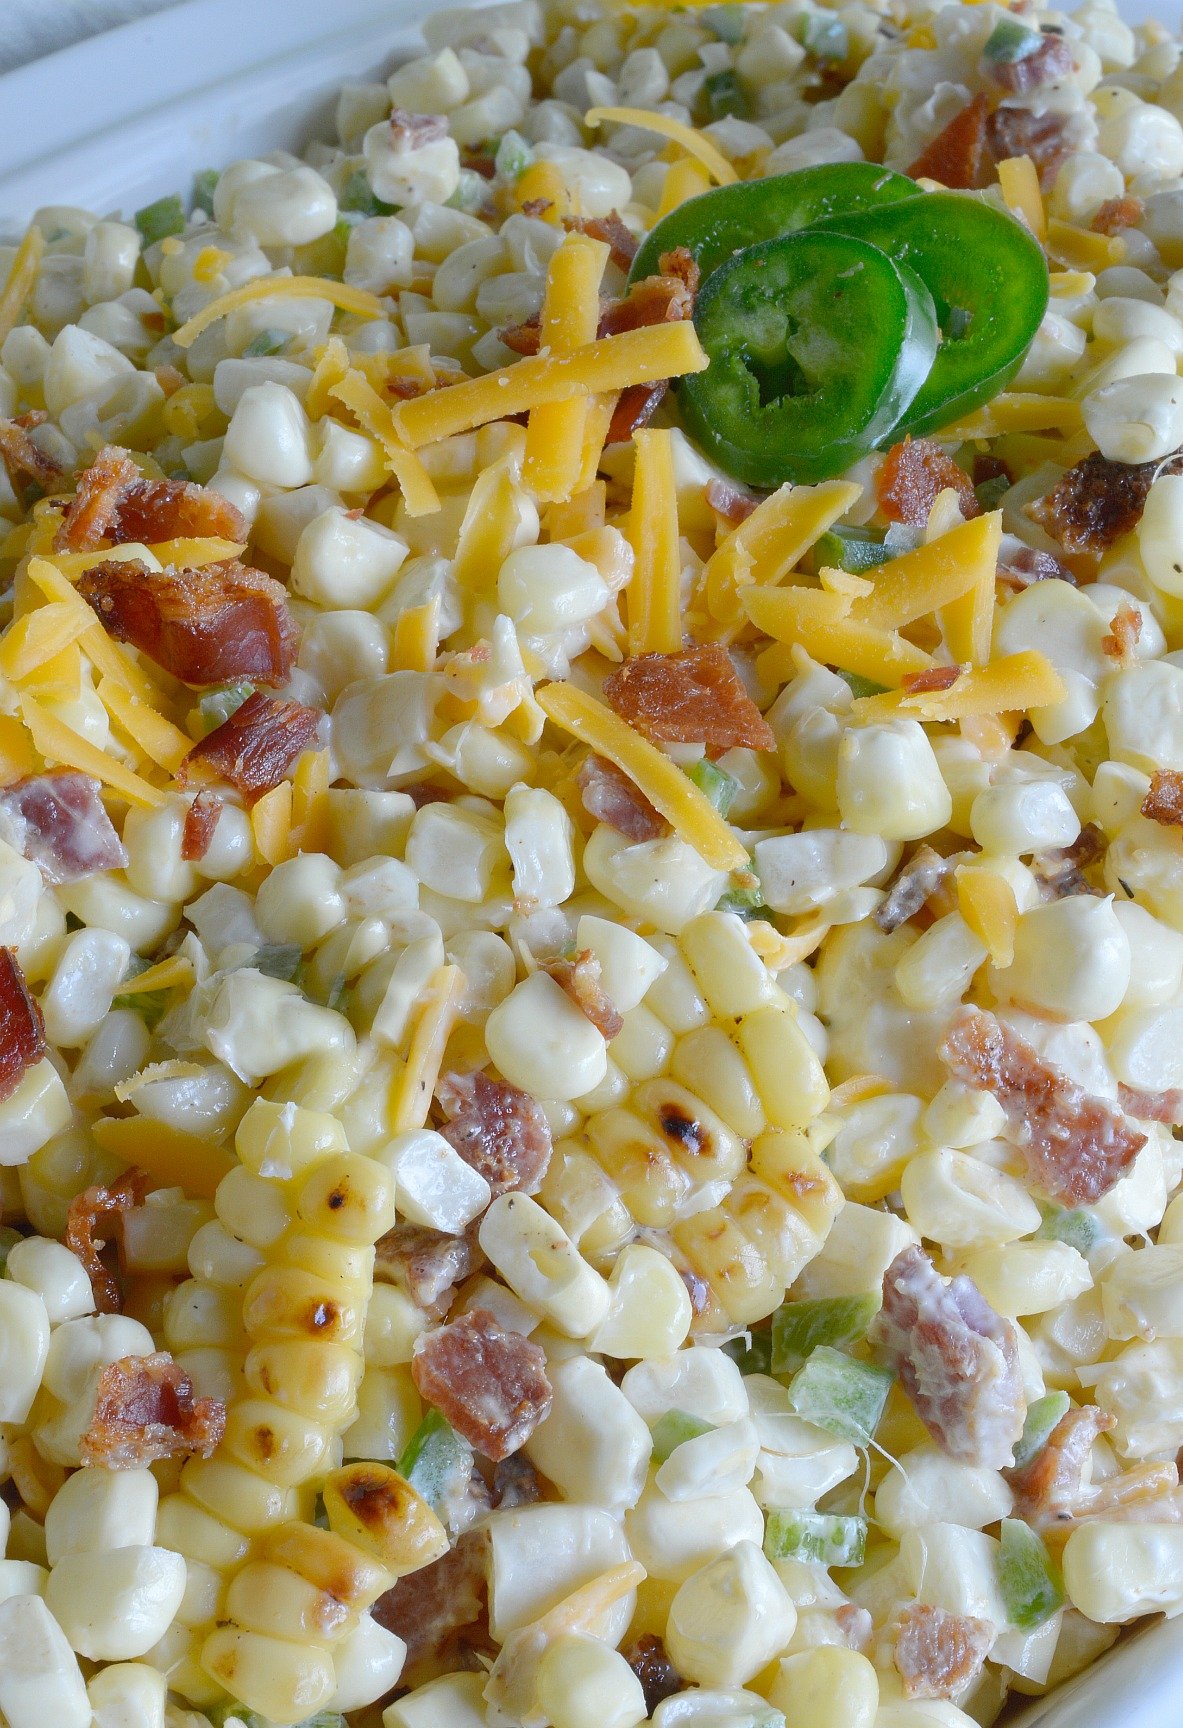 Bring on Summer and Barbecue season! This Jalapeño Popper Grilled Corn Salad Recipe brings so many great flavors together in one amazing side dish! Fresh grilled corn, bacon, jalapeño and cheddar cheese in a creamy summer salad.